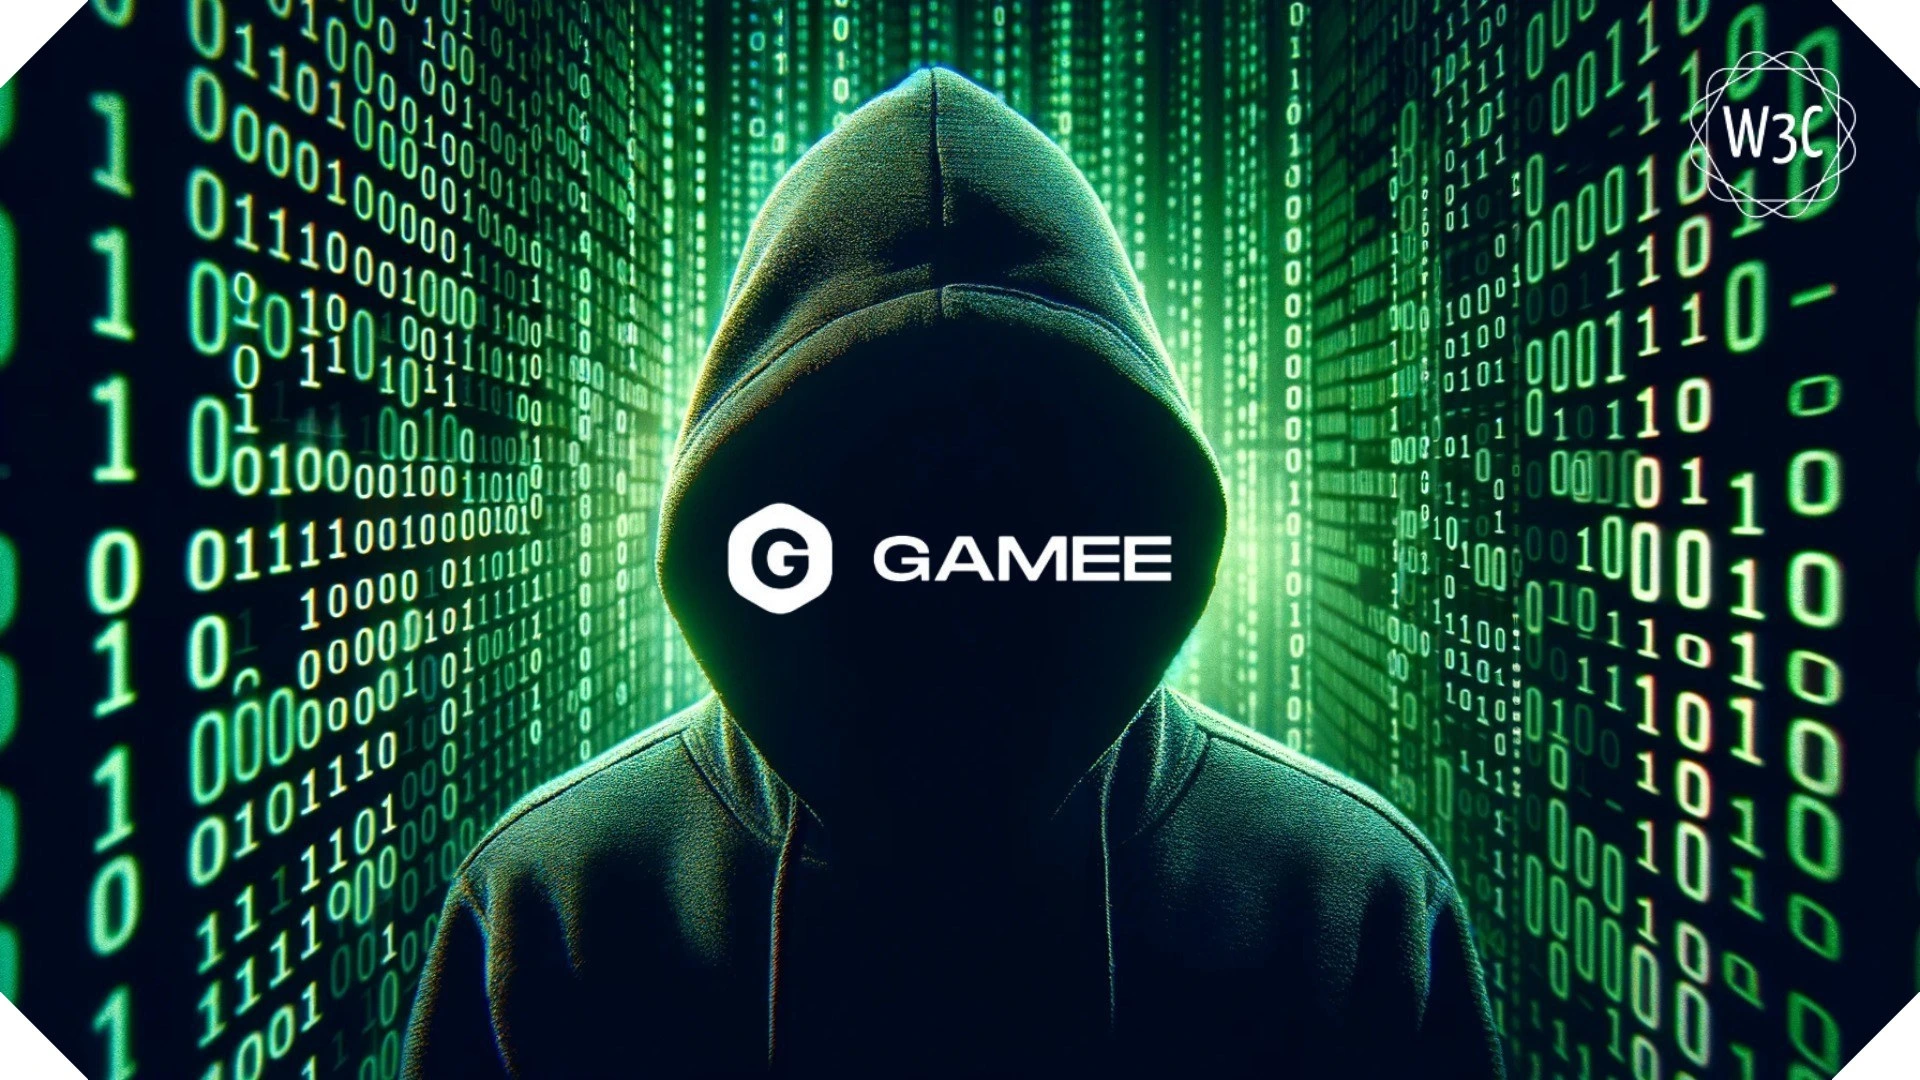 Gamee Suffers $7M Hack